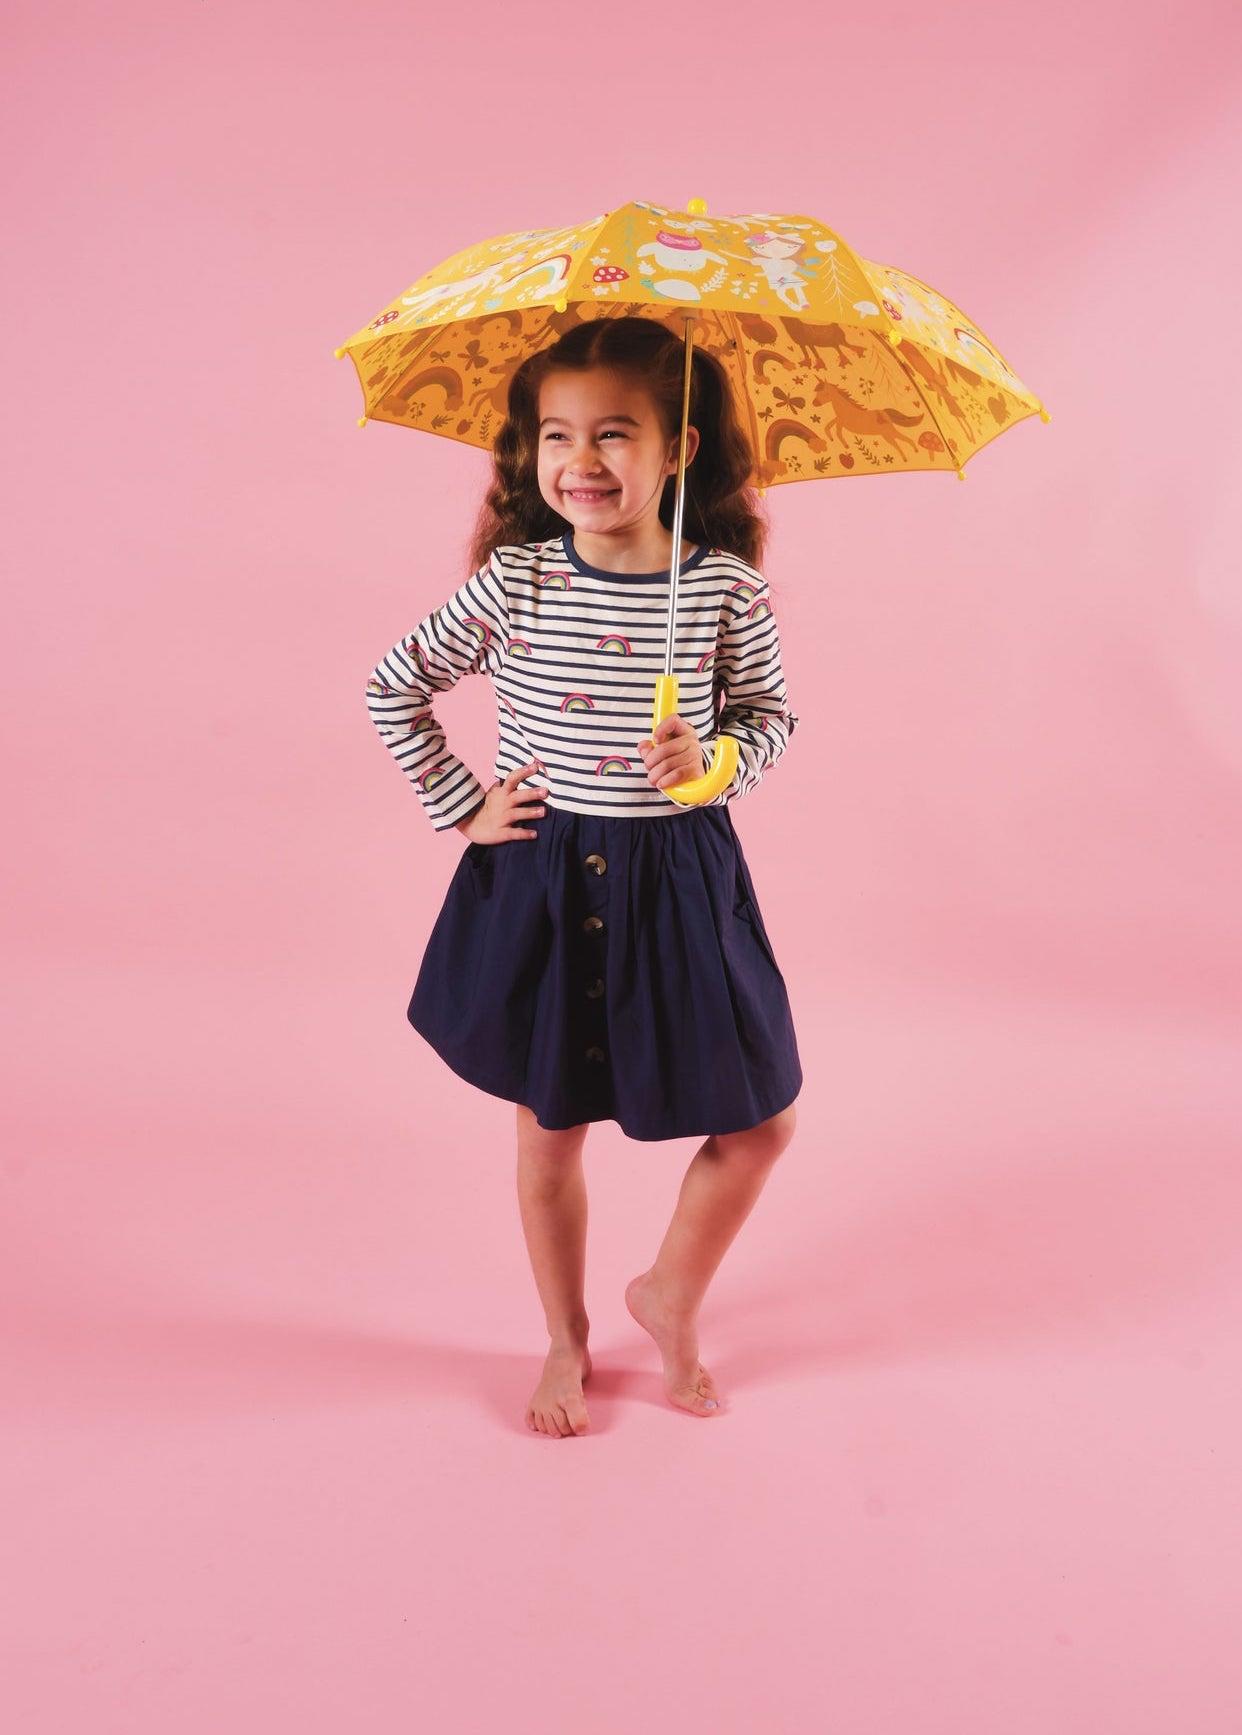 Bare-footed young girl wearing a navy skirt and white and navy sttiped top holding a yellow umbrella. Pink background.